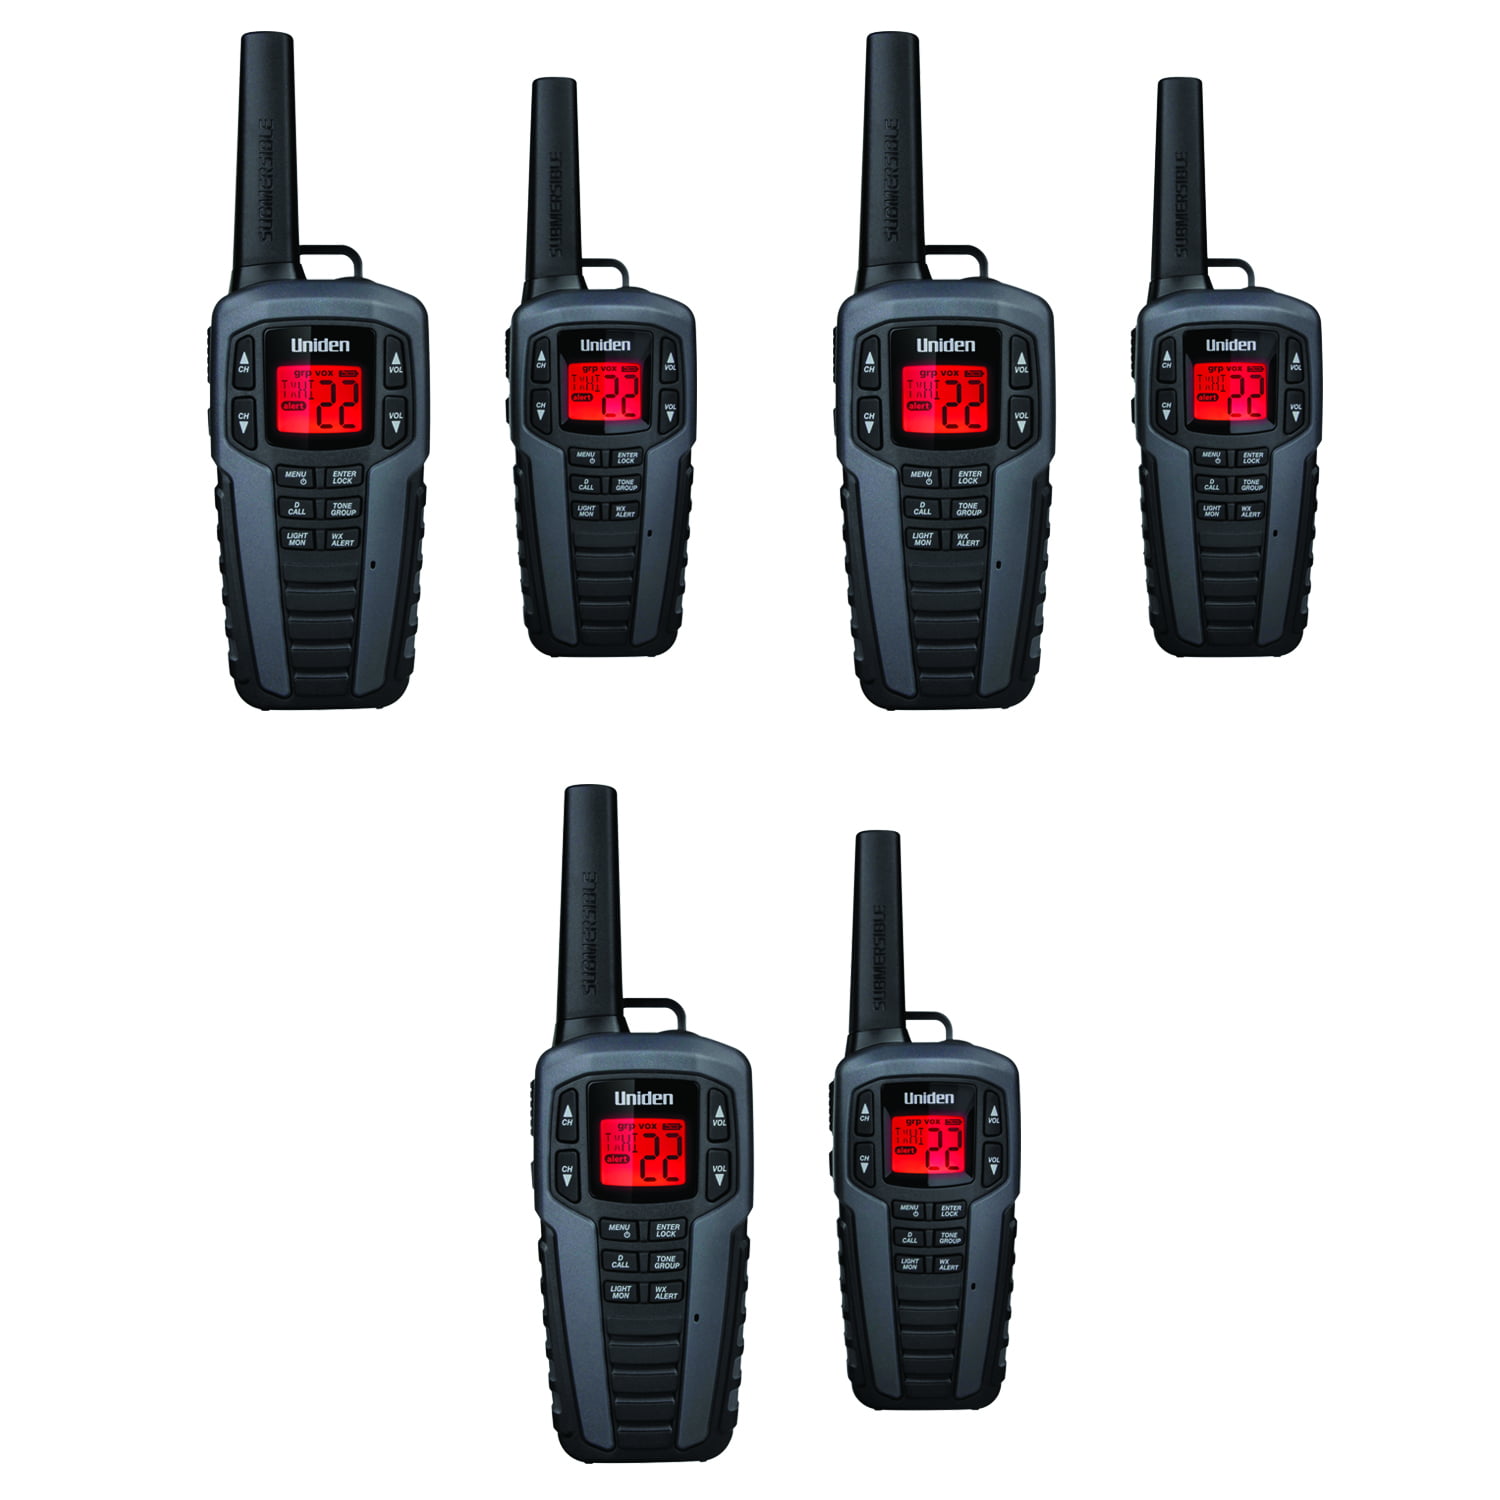 Uniden SX167-2C Up to 16 Mile Range Two-Way Radio Walkie Talkies, Rechargeable Batteries with Convenient Charging Cable, NOAA Weather Channels, Roger - 3